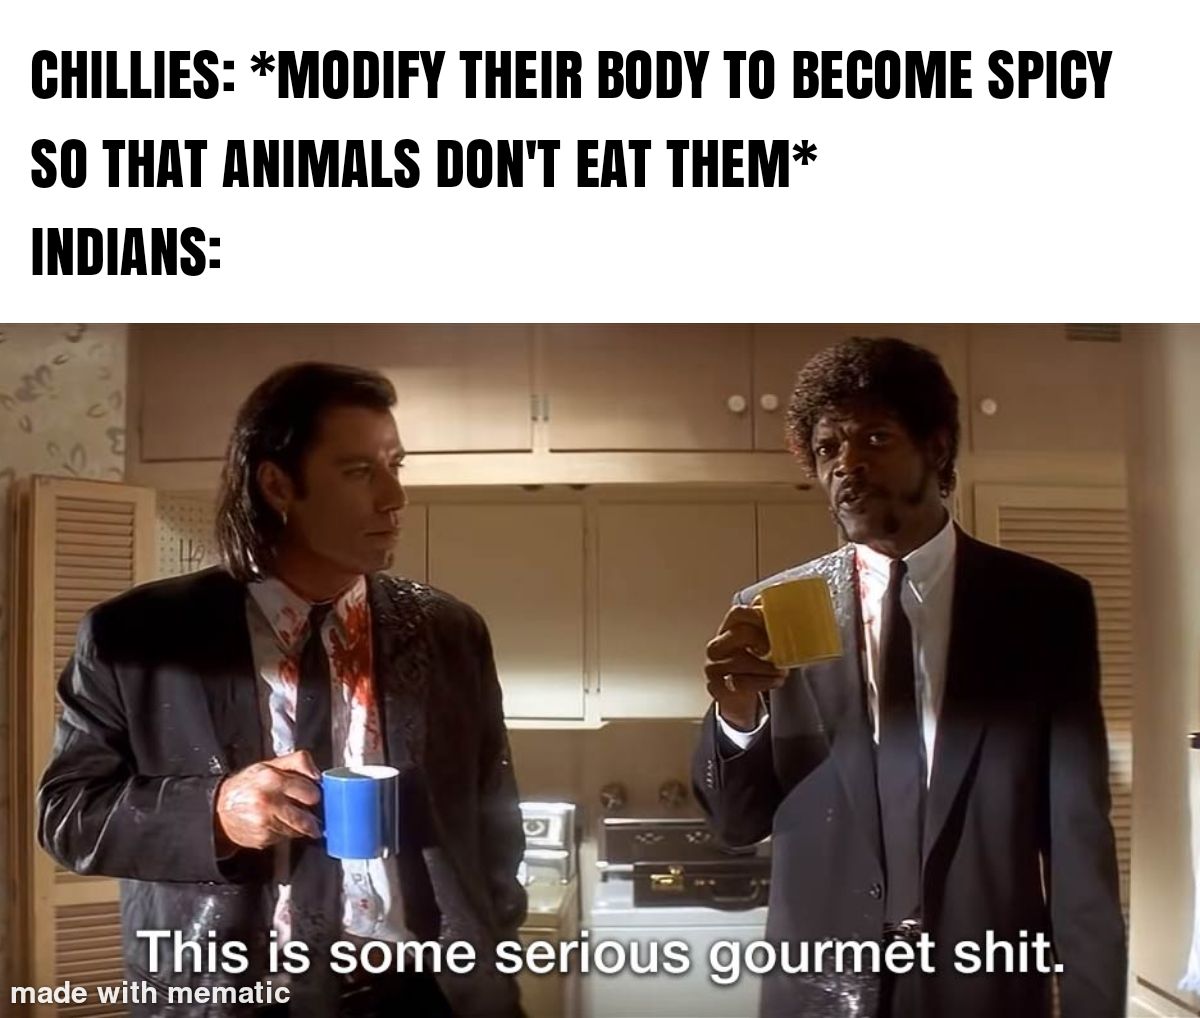 mmm spicy